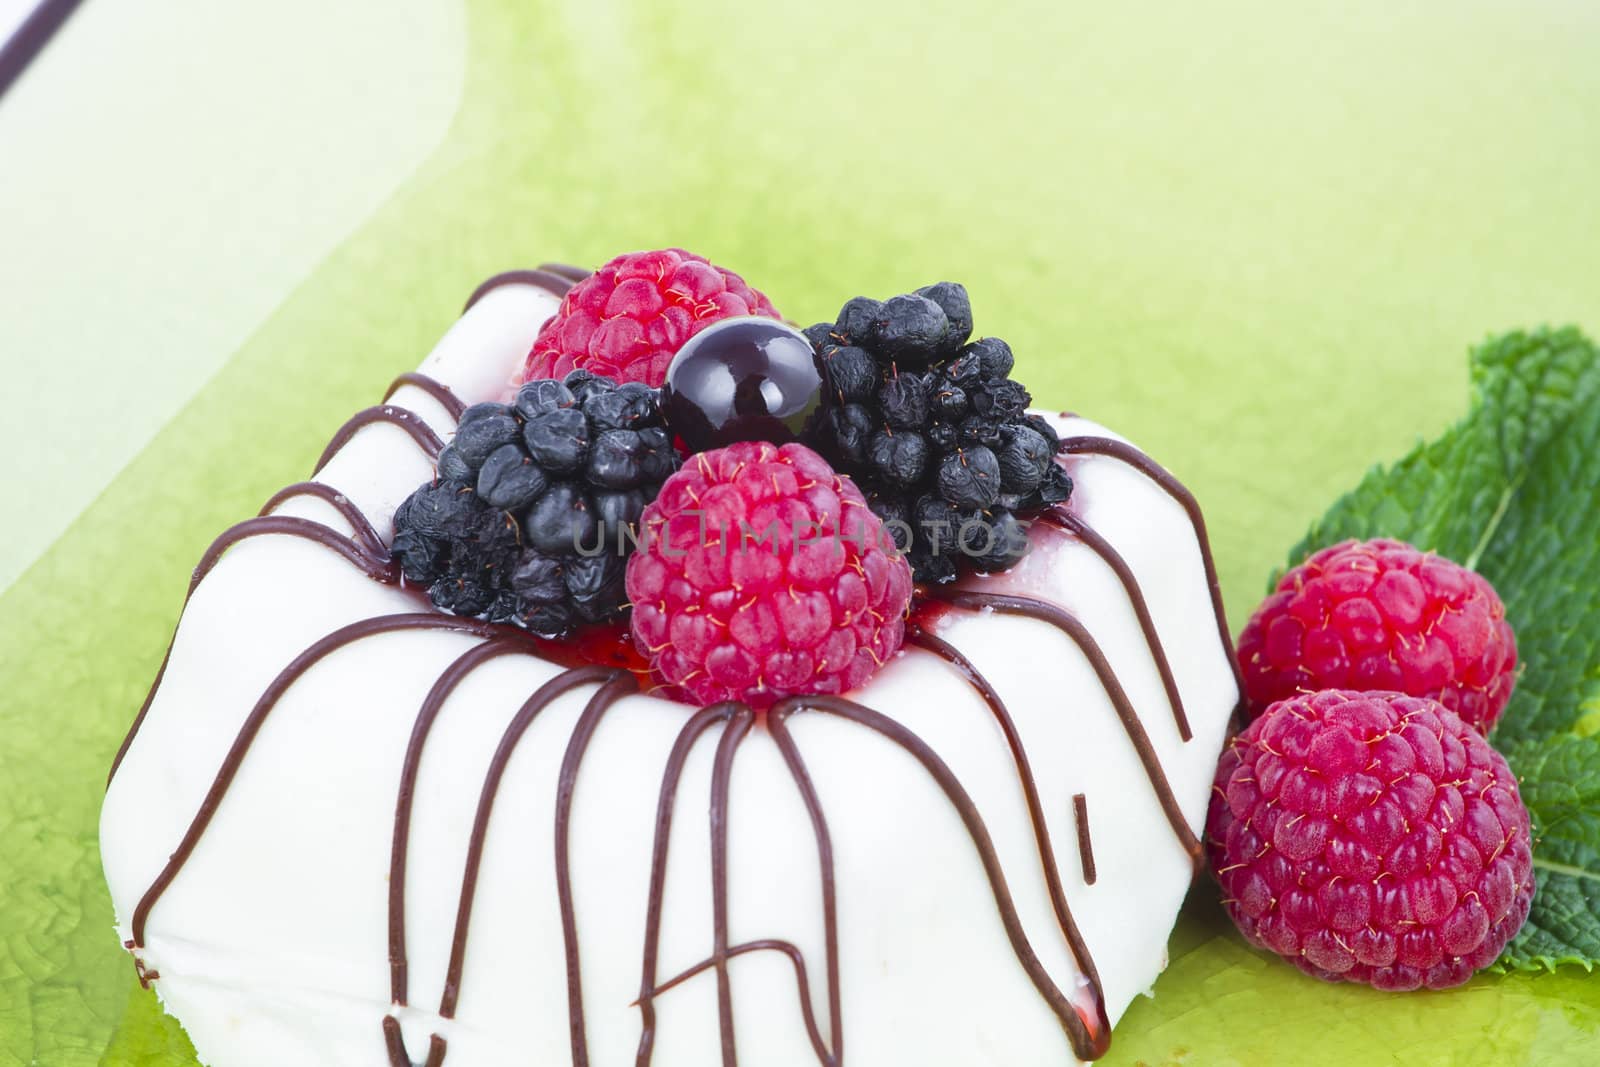 Black and White chocolate with blackberries on green plate